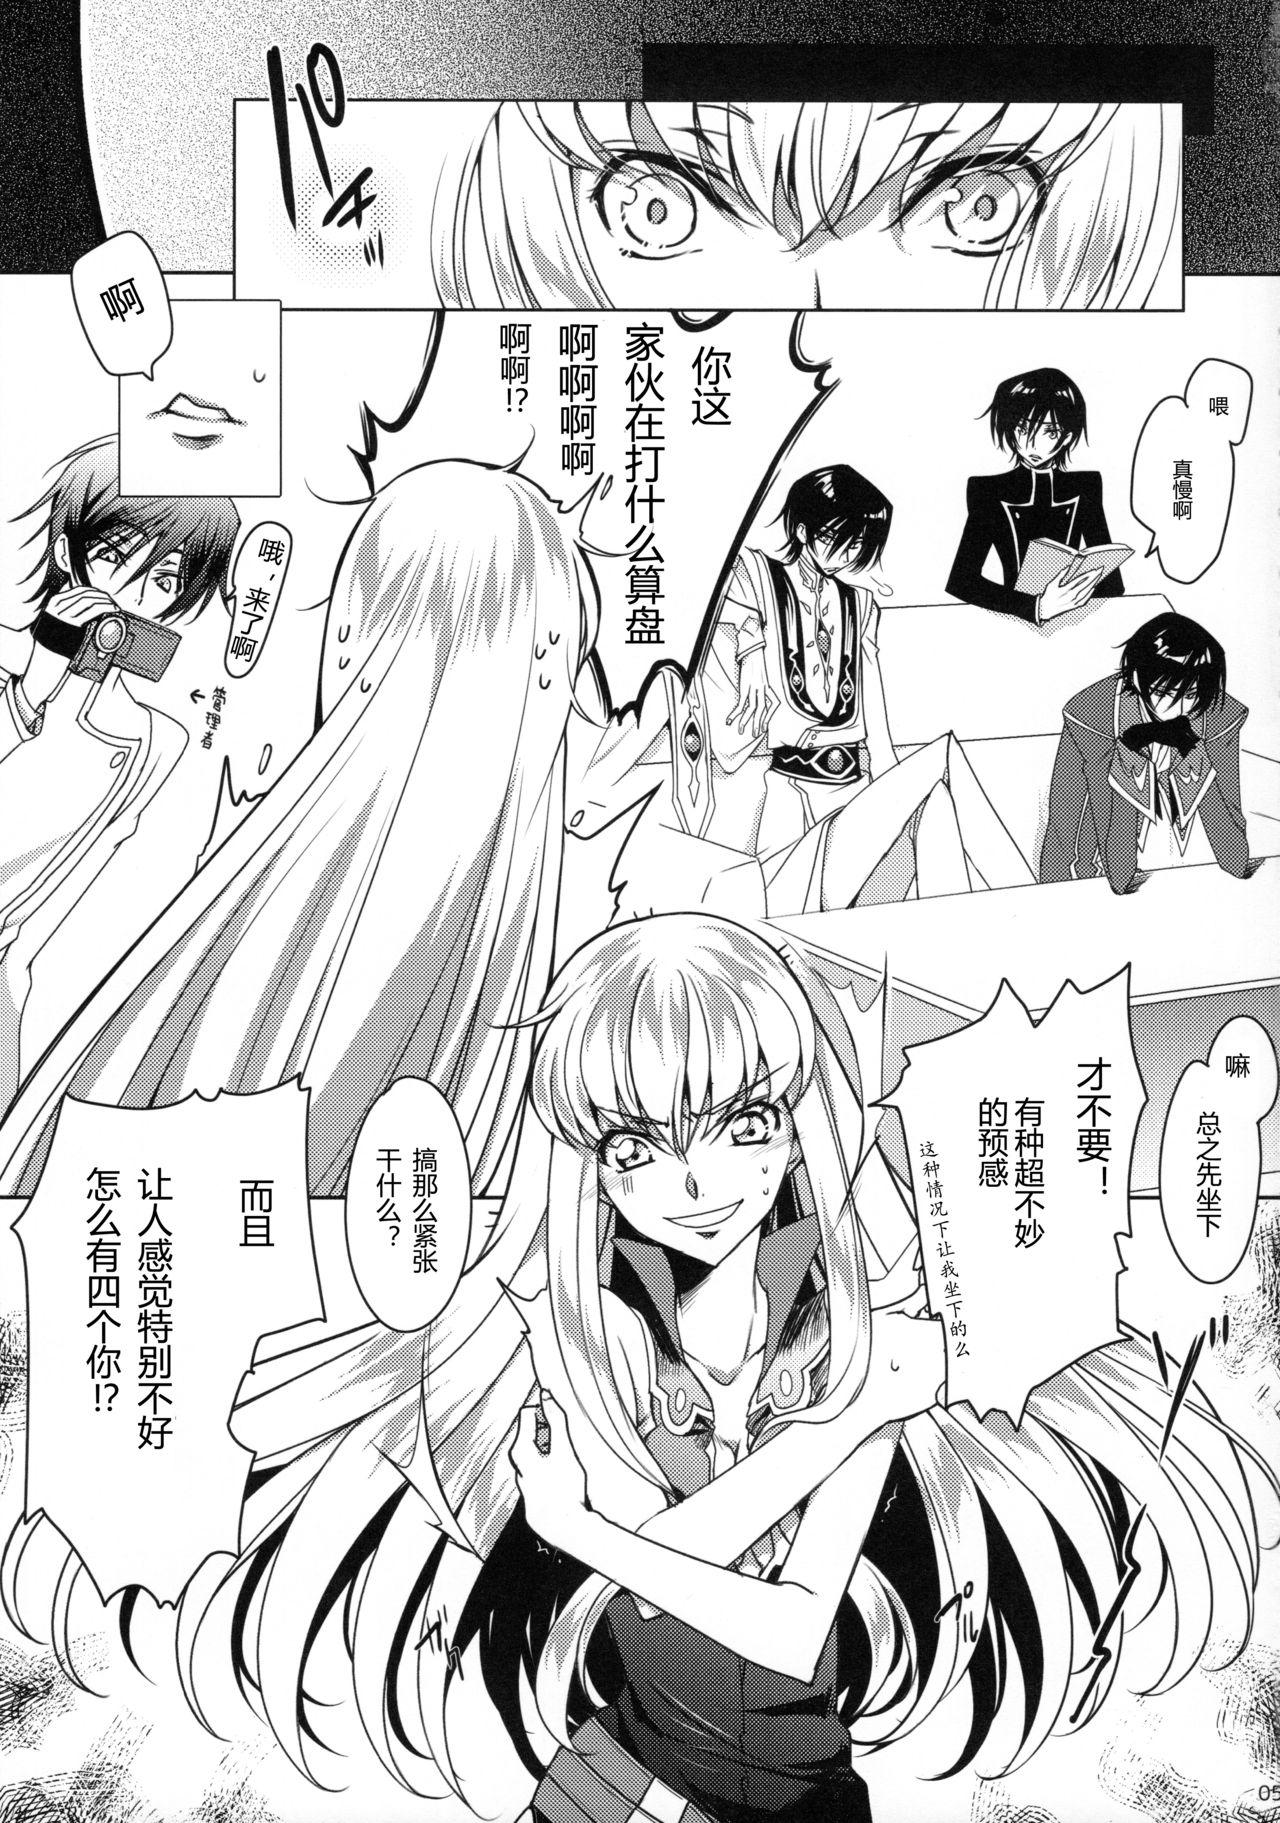 Spy Camera Pansy Noise - Code geass Money - Page 5